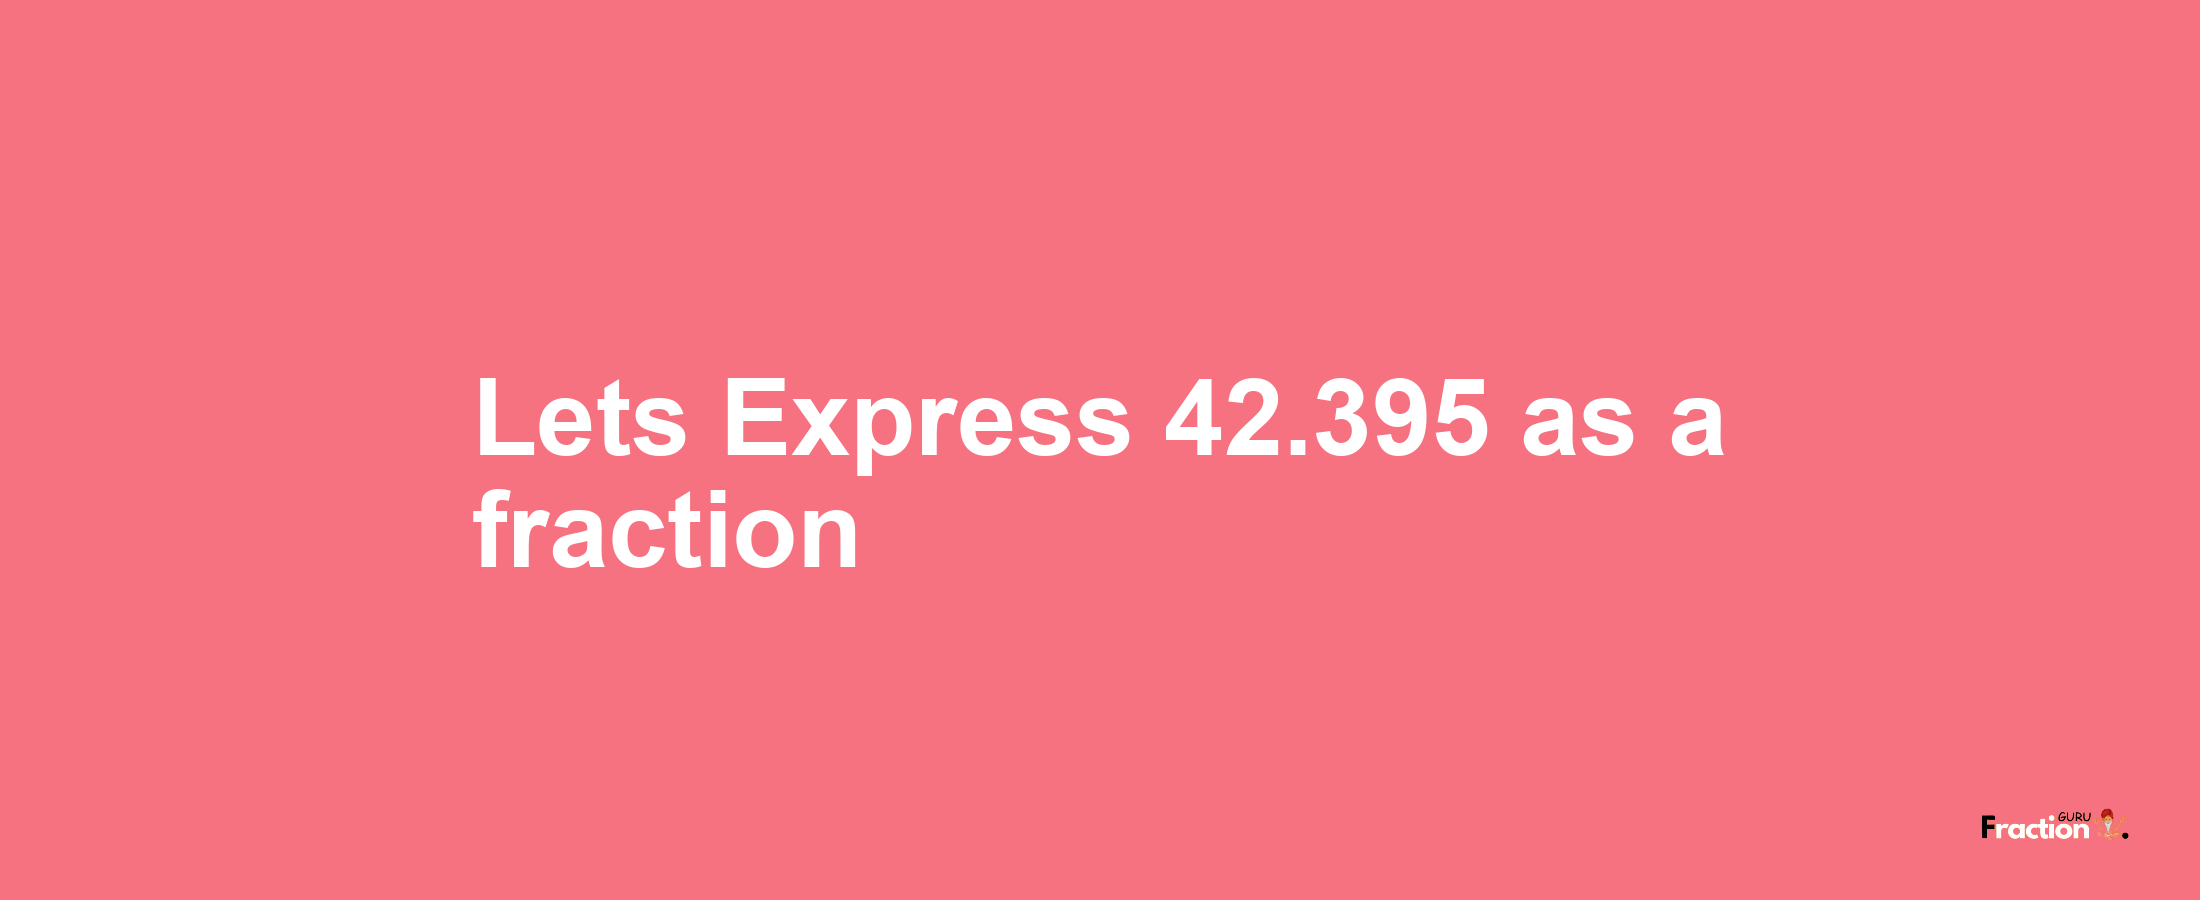 Lets Express 42.395 as afraction